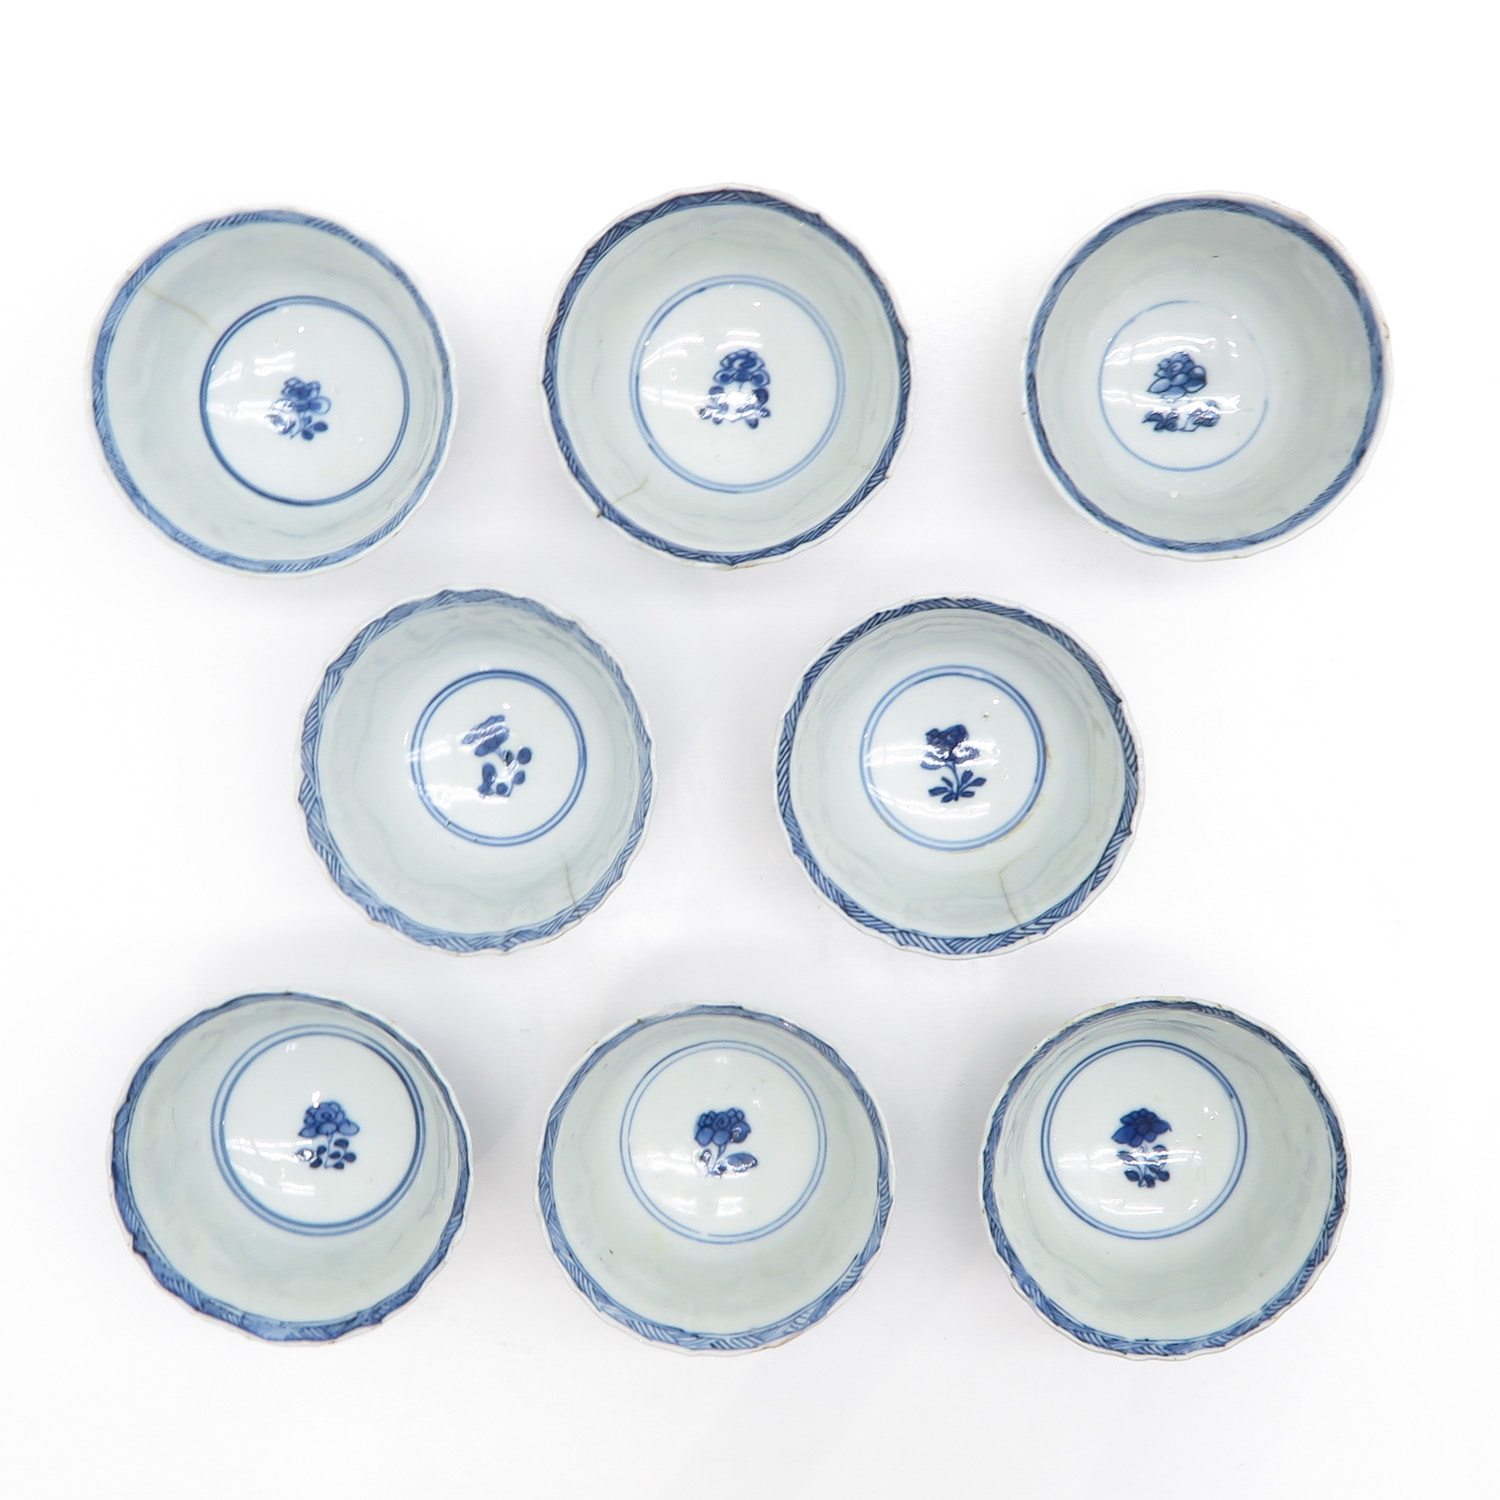 A Series of Cups and Saucers - Image 7 of 8